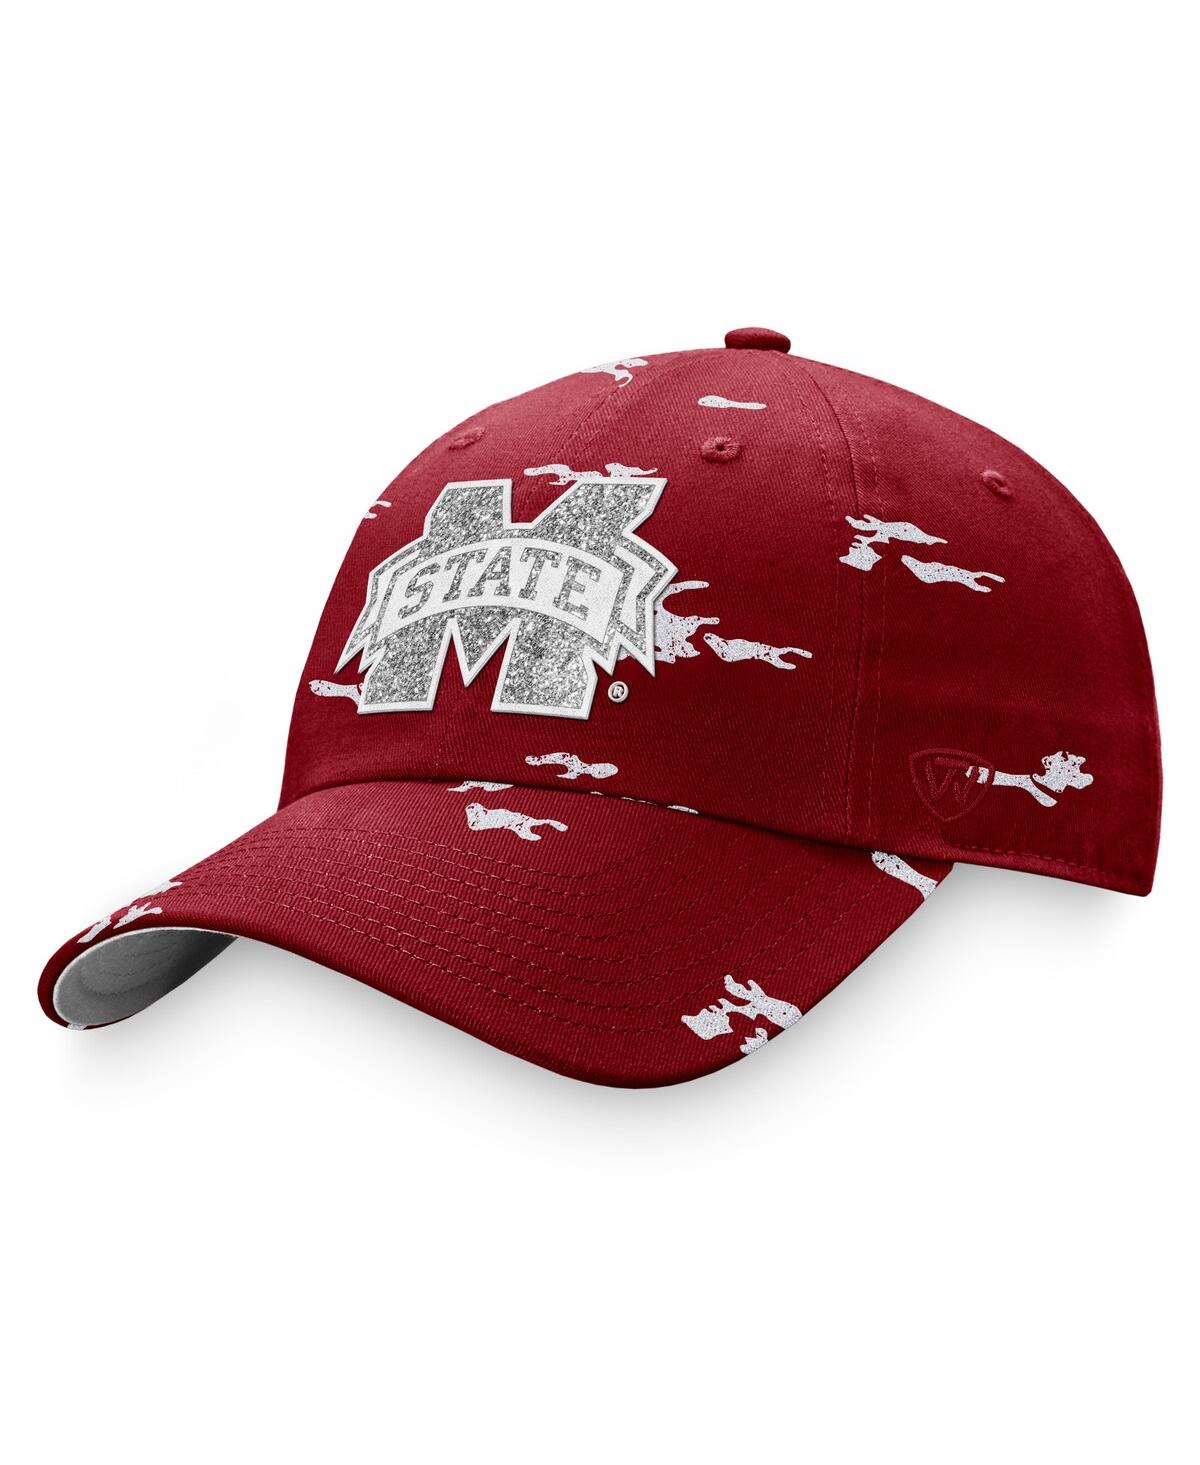 Women's Top of the World Maroon Mississippi State Bulldogs Oht Military-Inspired Appreciation Betty Adjustable Hat - Maroon